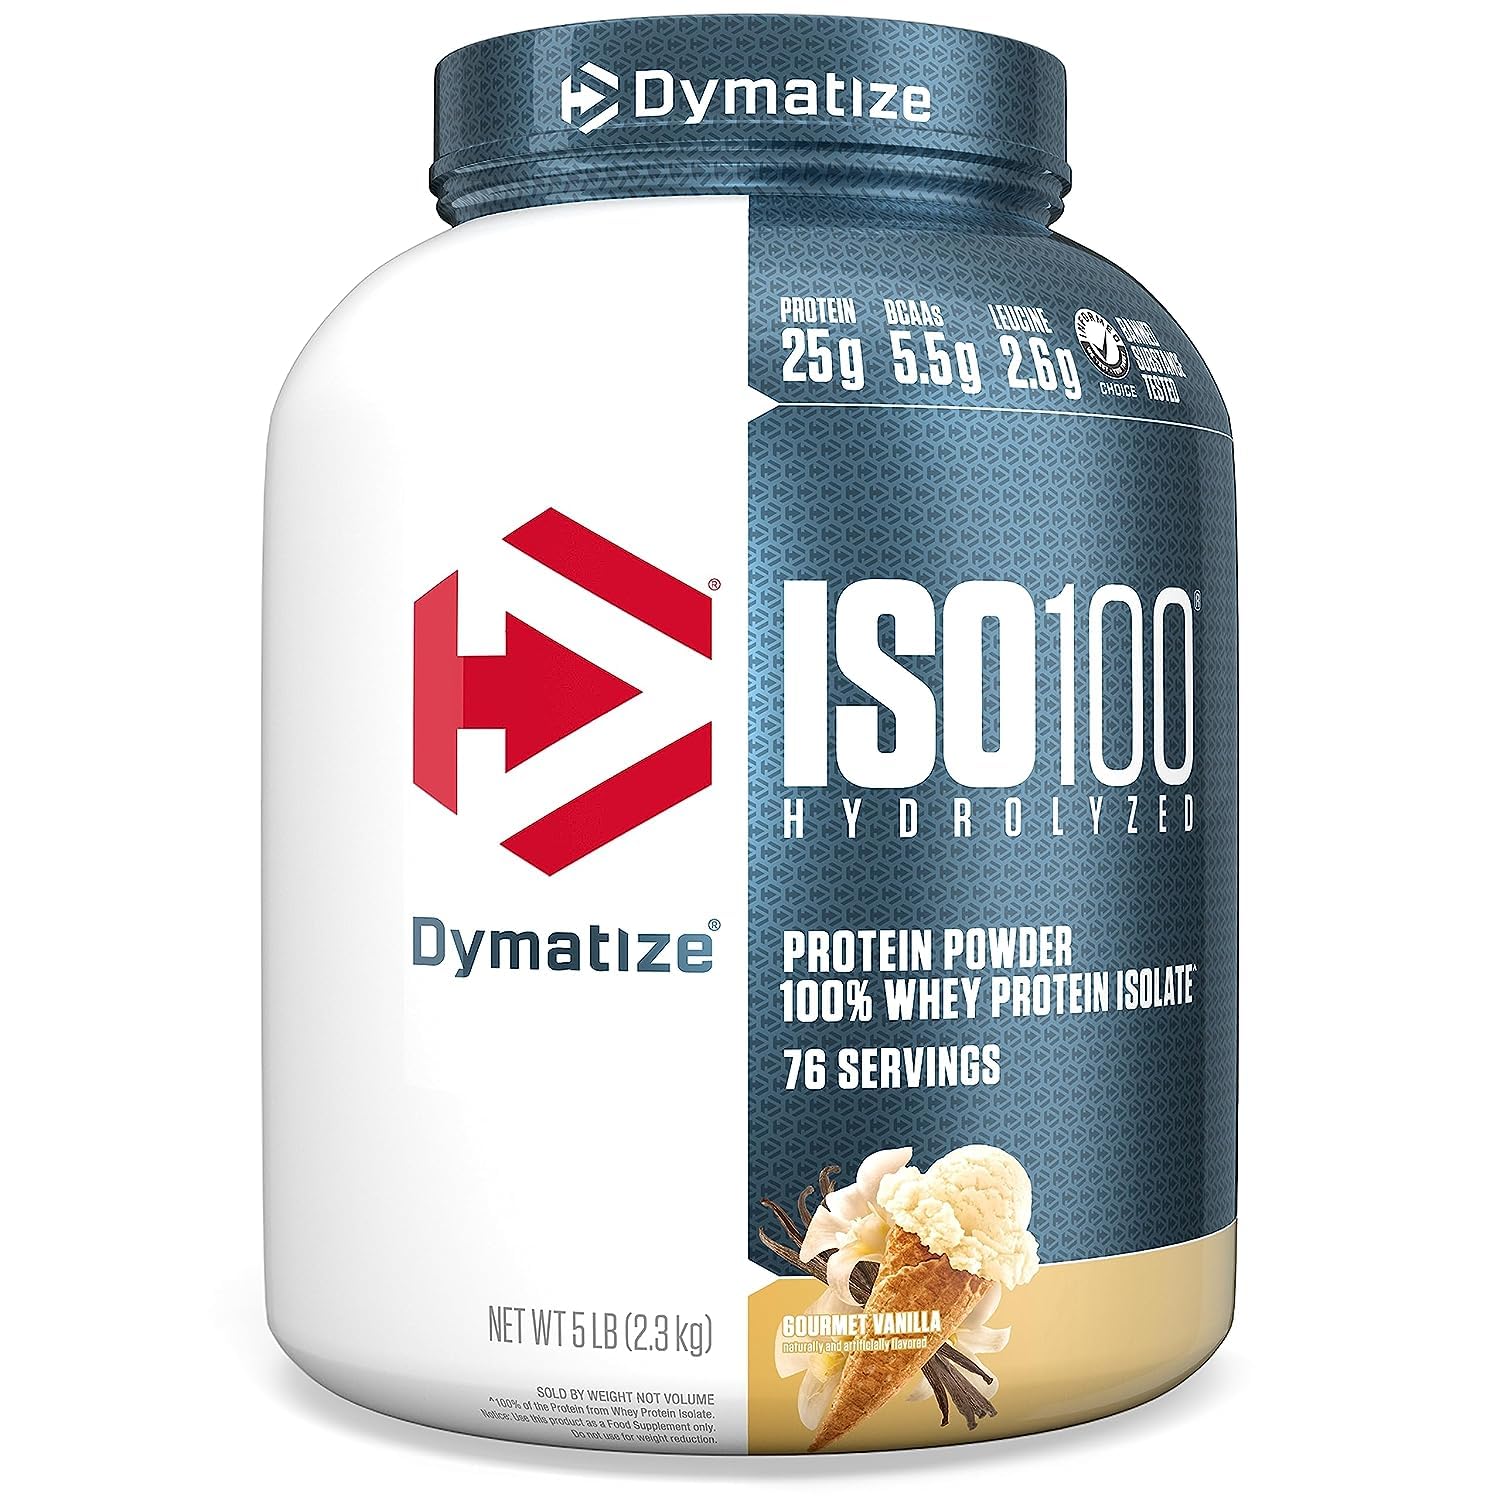 5-lb Dymatize ISO100 Hydrolyzed 100% Whey Isolate Protein (various flavors) 30% Coupon (YMMV) w/ 15% = $43.96 OR $51.96 w/ 5% S&S